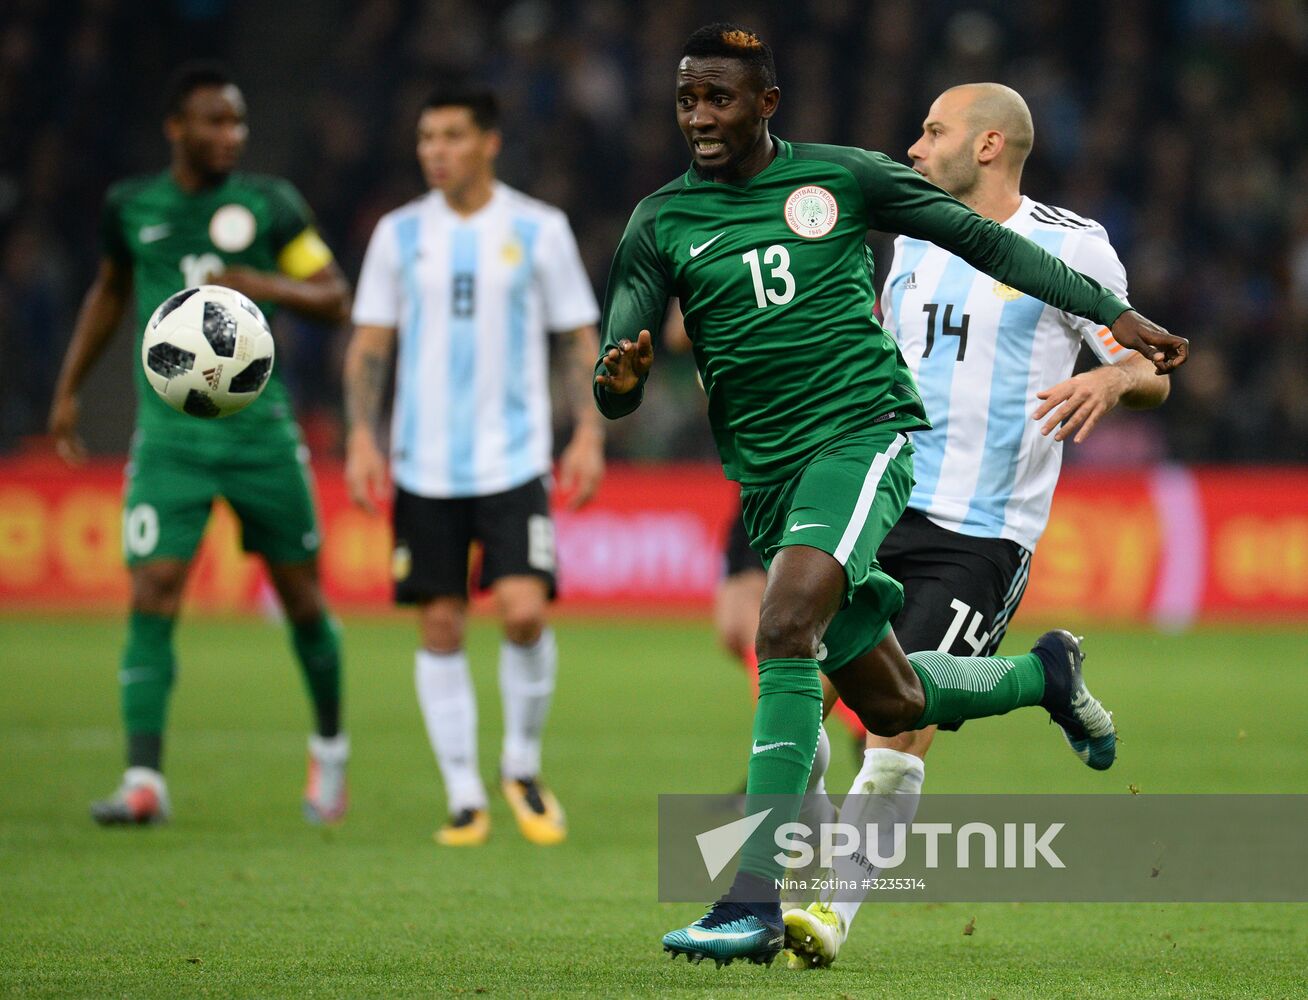 Football. Friendly match between Argentina and Nigeria